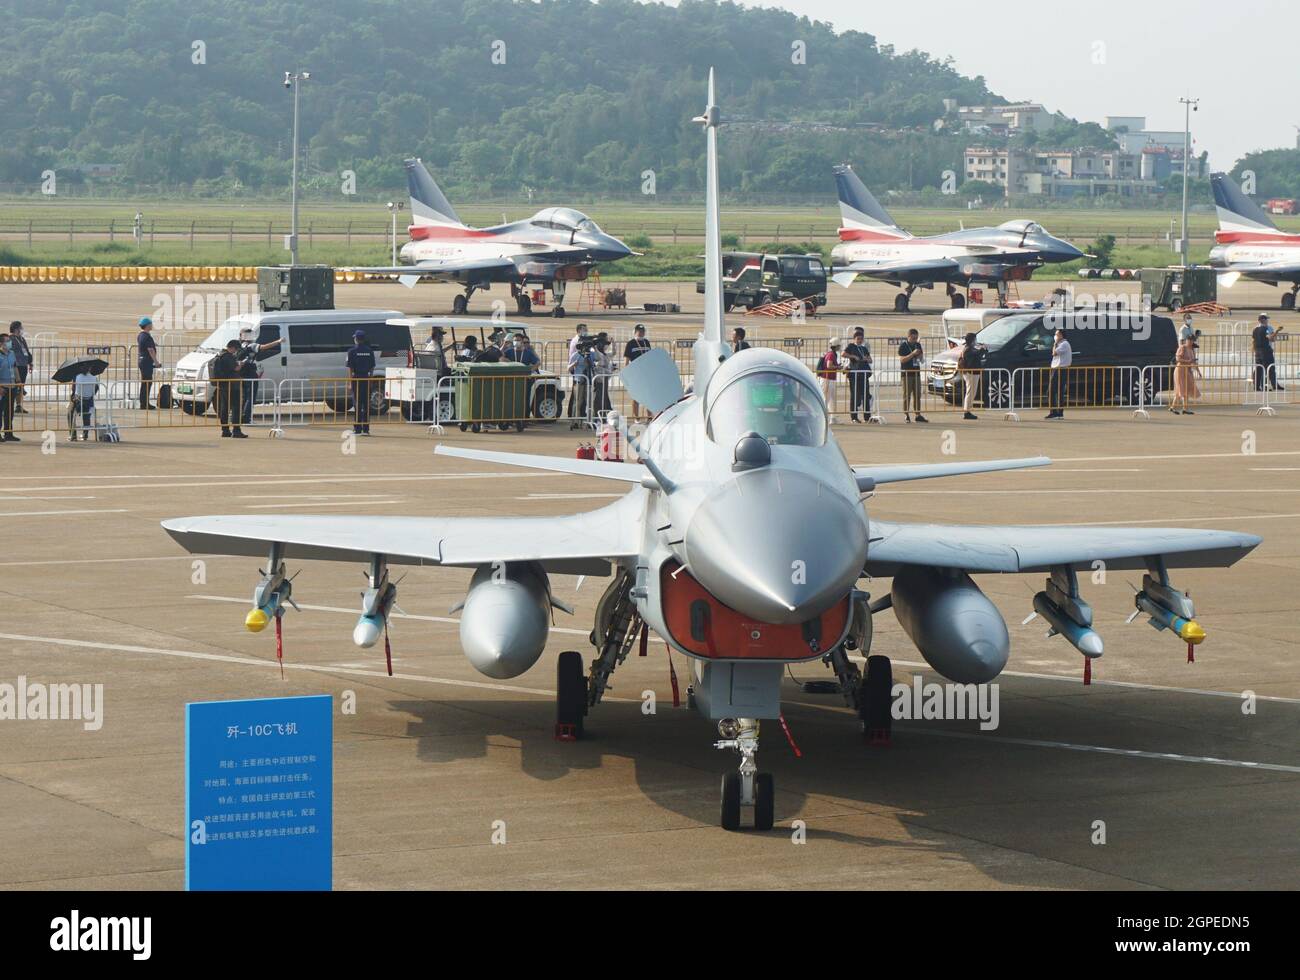 Zhuhai, Zhuhai, China. 29th Sep, 2021. The J-10C fighter was photographed at the Zhuhai Air Show on September 29, 2021.As our armyÃ¢â‚¬â„¢s most advanced single-engine fighter J-10C, it debuted at the Zhuhai Air Show and attracted the attention of many military fans.The J-10C fighter is a third-generation improved supersonic multi-purpose fighter independently developed by my country. It is equipped with advanced avionics systems and multiple advanced airborne weapons. Credit: ZUMA Press, Inc./Alamy Live News Stock Photo